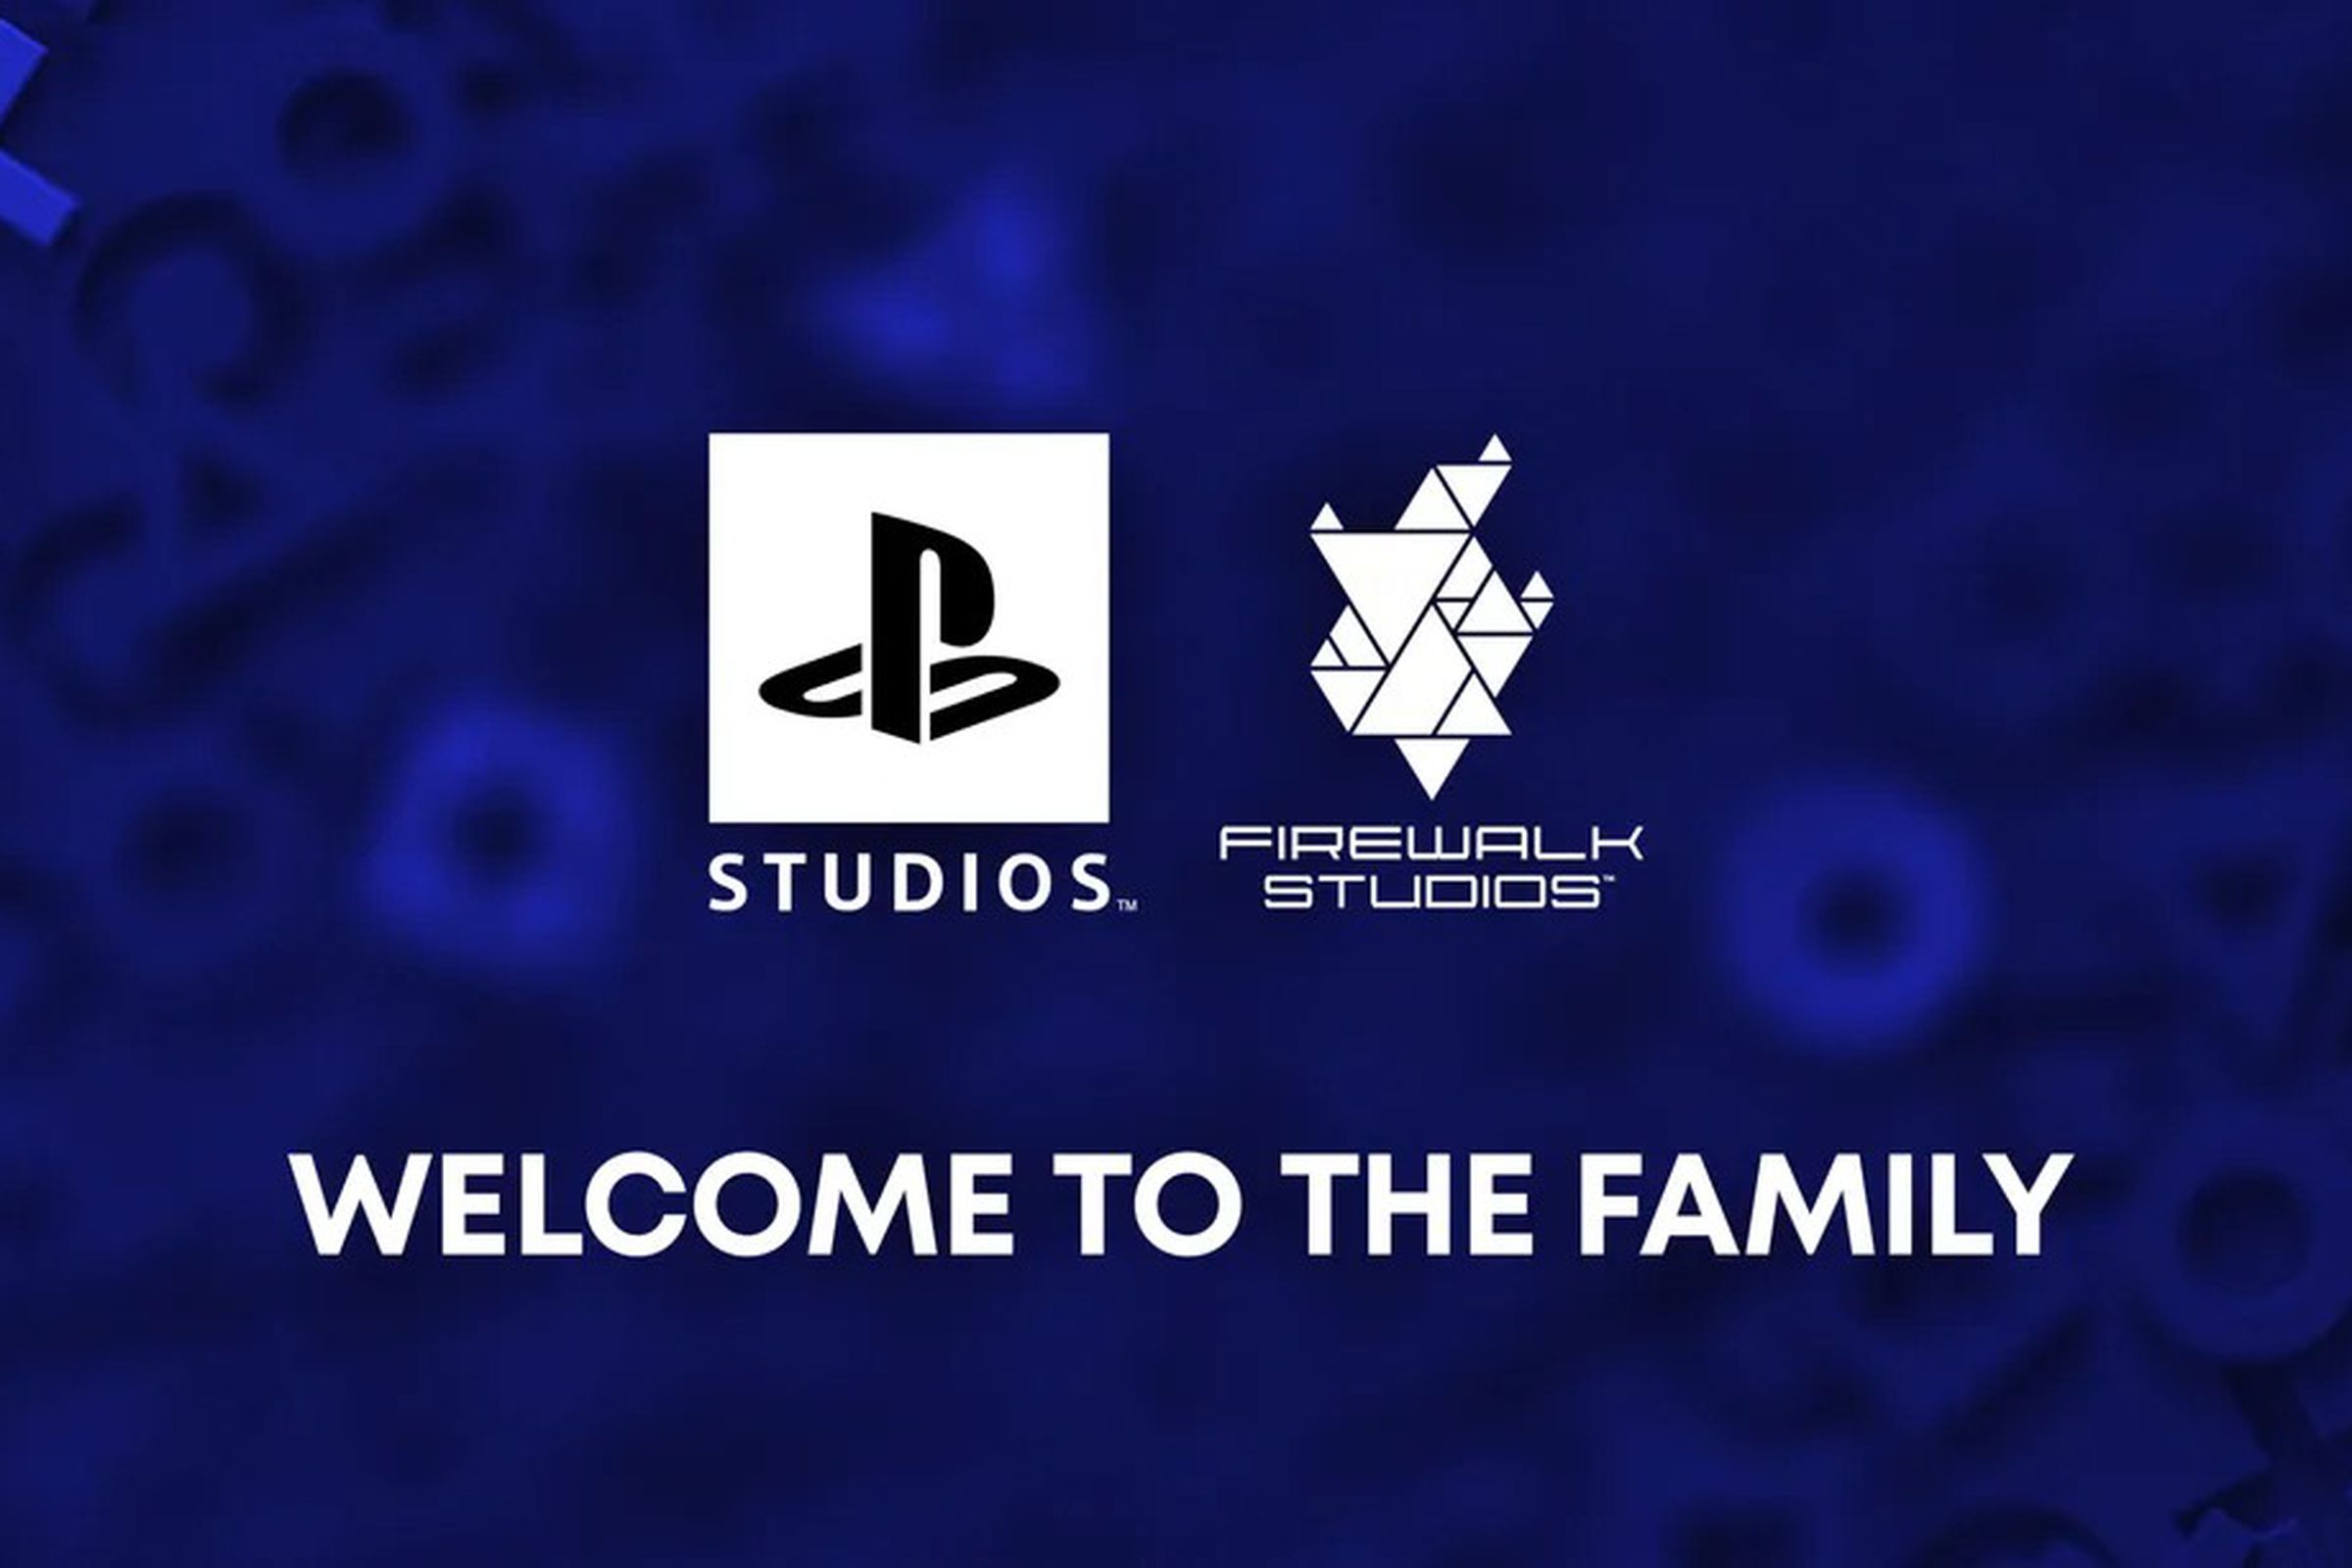 A promotional image with the PlayStation Studios and Firewalk Studios logos.